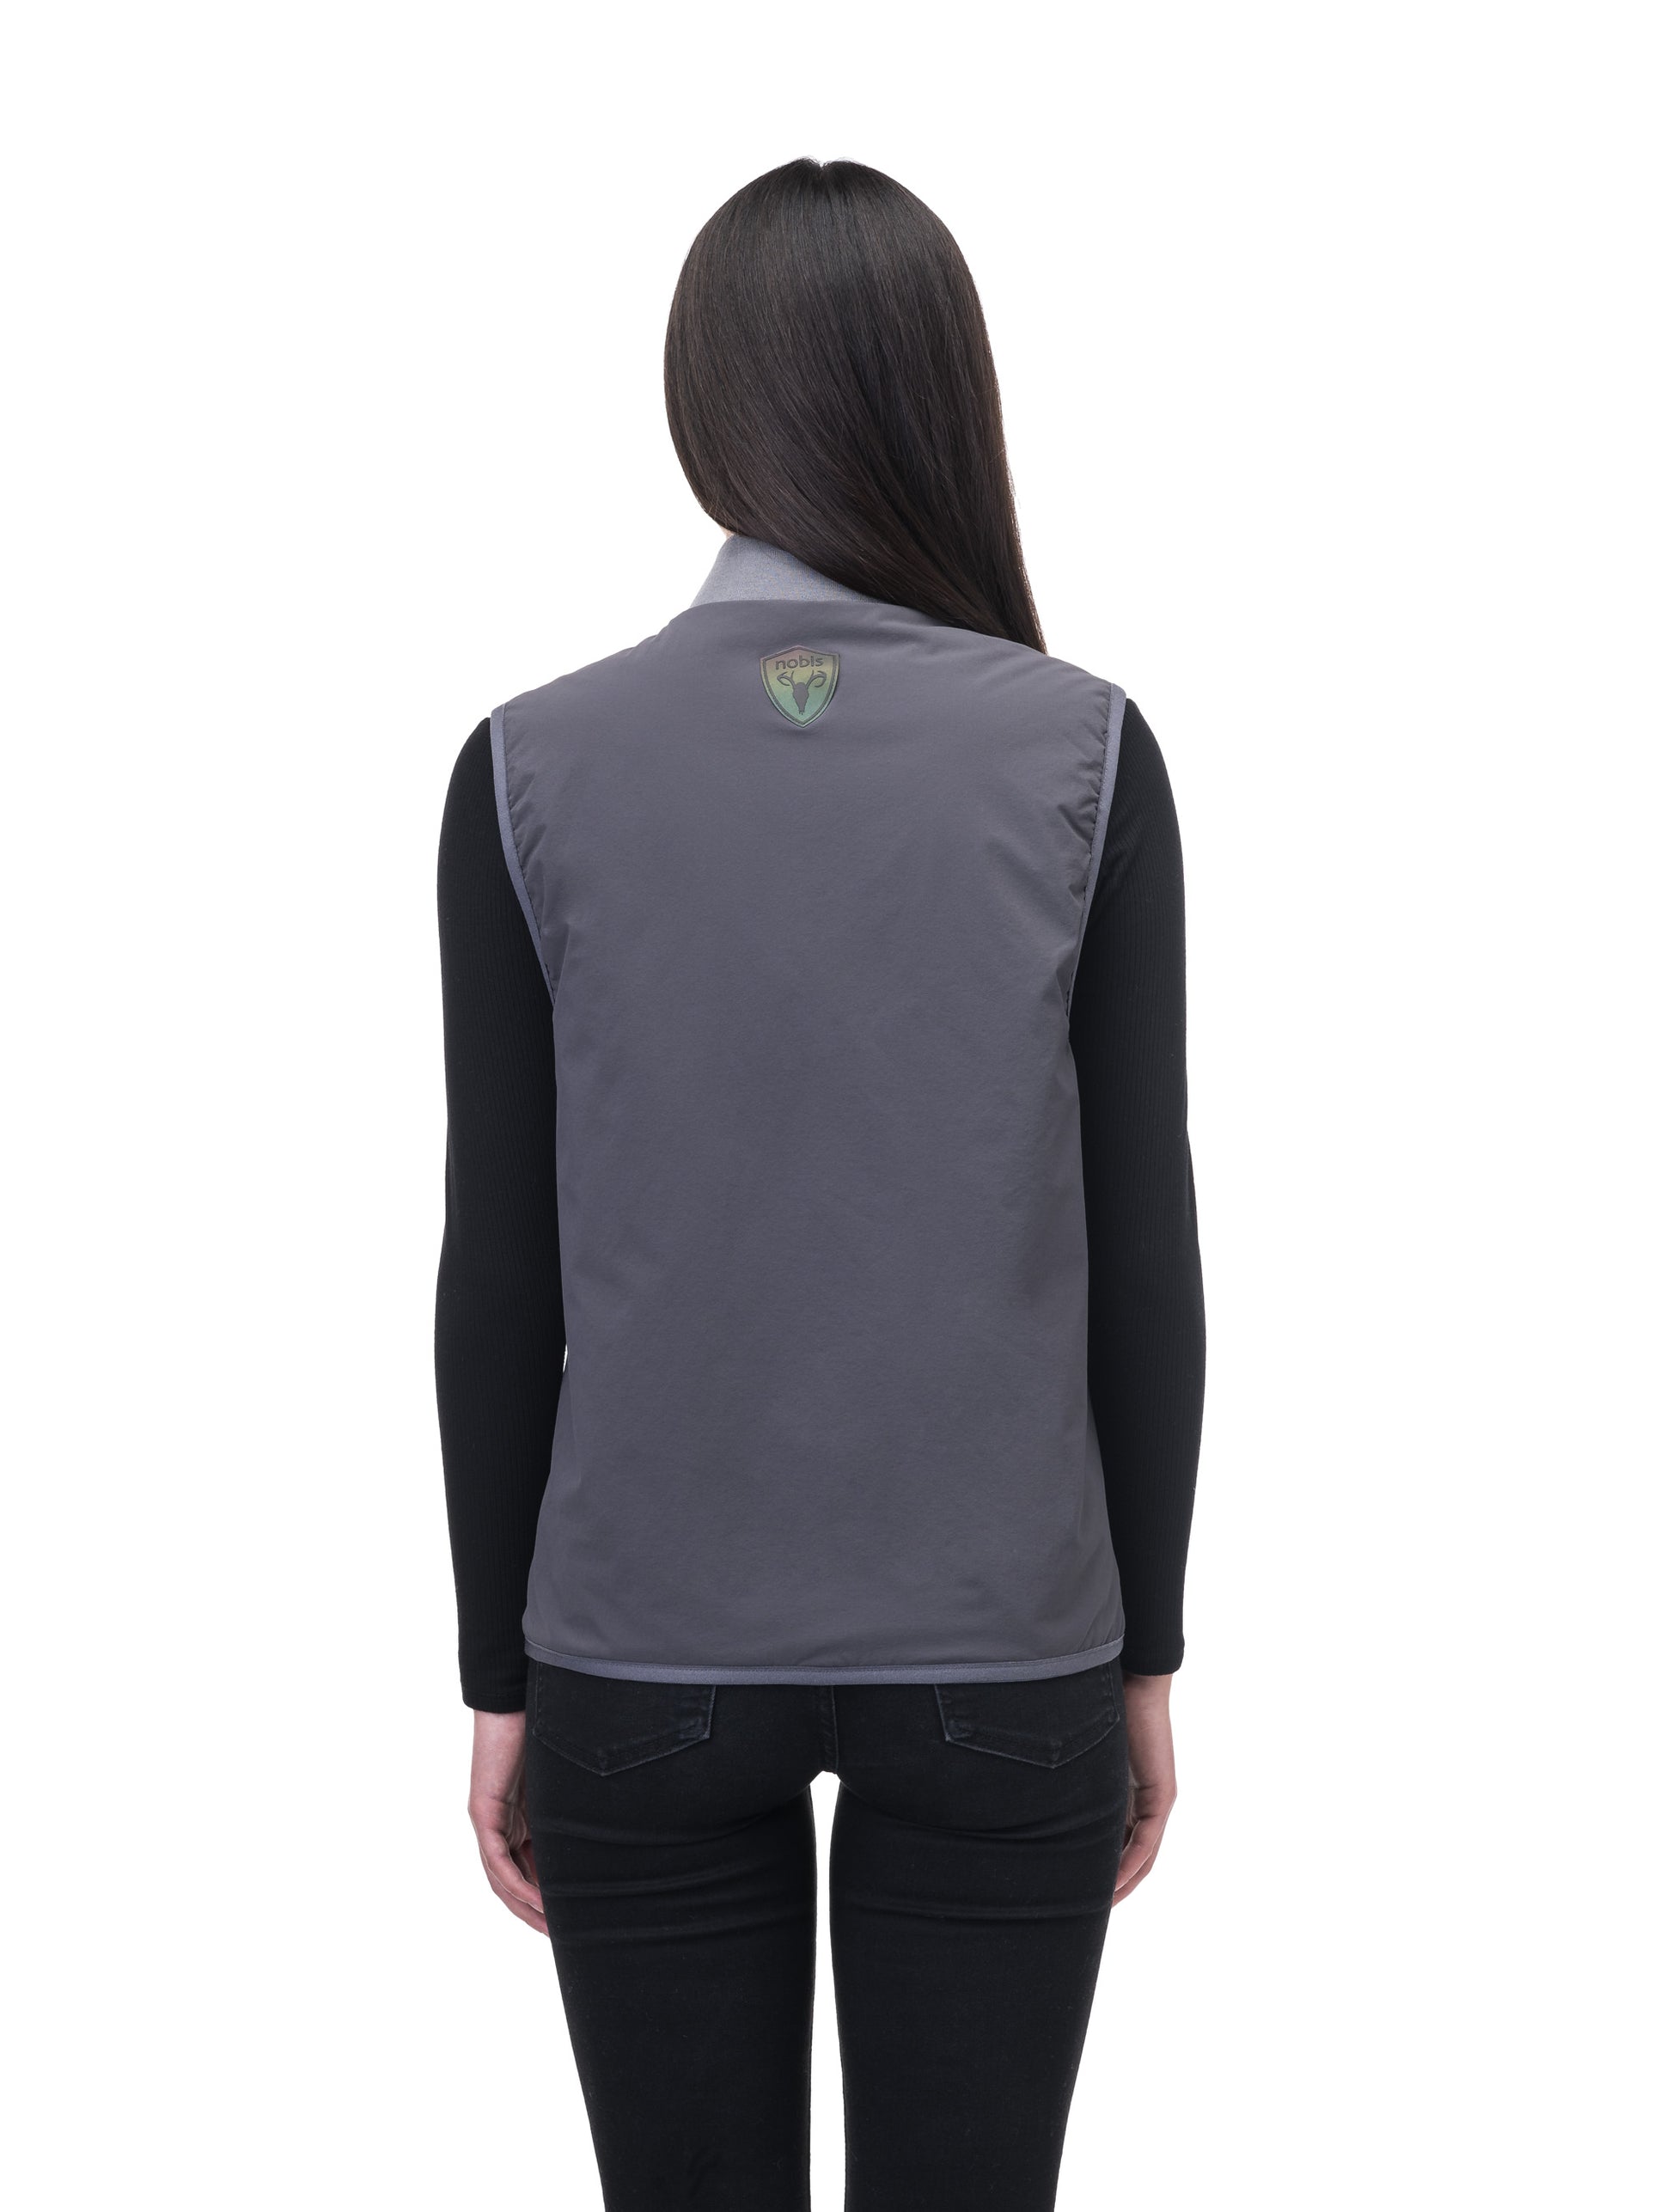 Unisex hip length vest with a contrast colour back panel, and hidden zipper pockets at waist, and an invisible zipper pocket at chest, in Concrete/Steel Grey